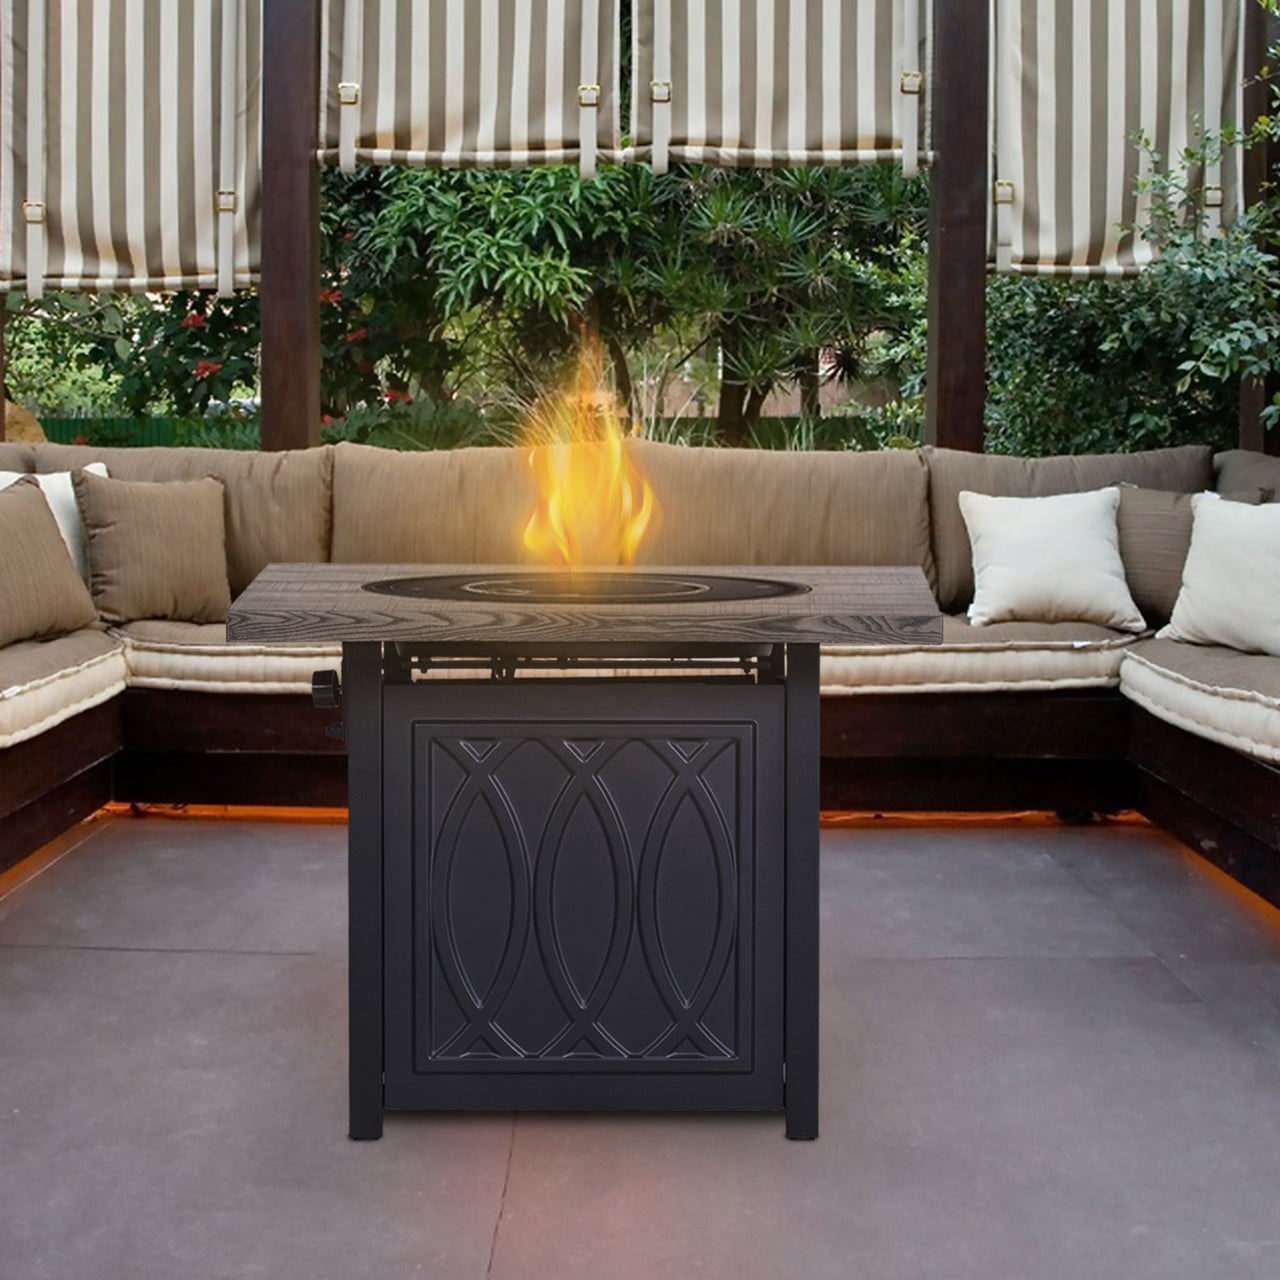 35'' Outdoor 50,000BTU Auto-Ignition Propane Gas Fire Table with Waterproof Cover Glass fire beads